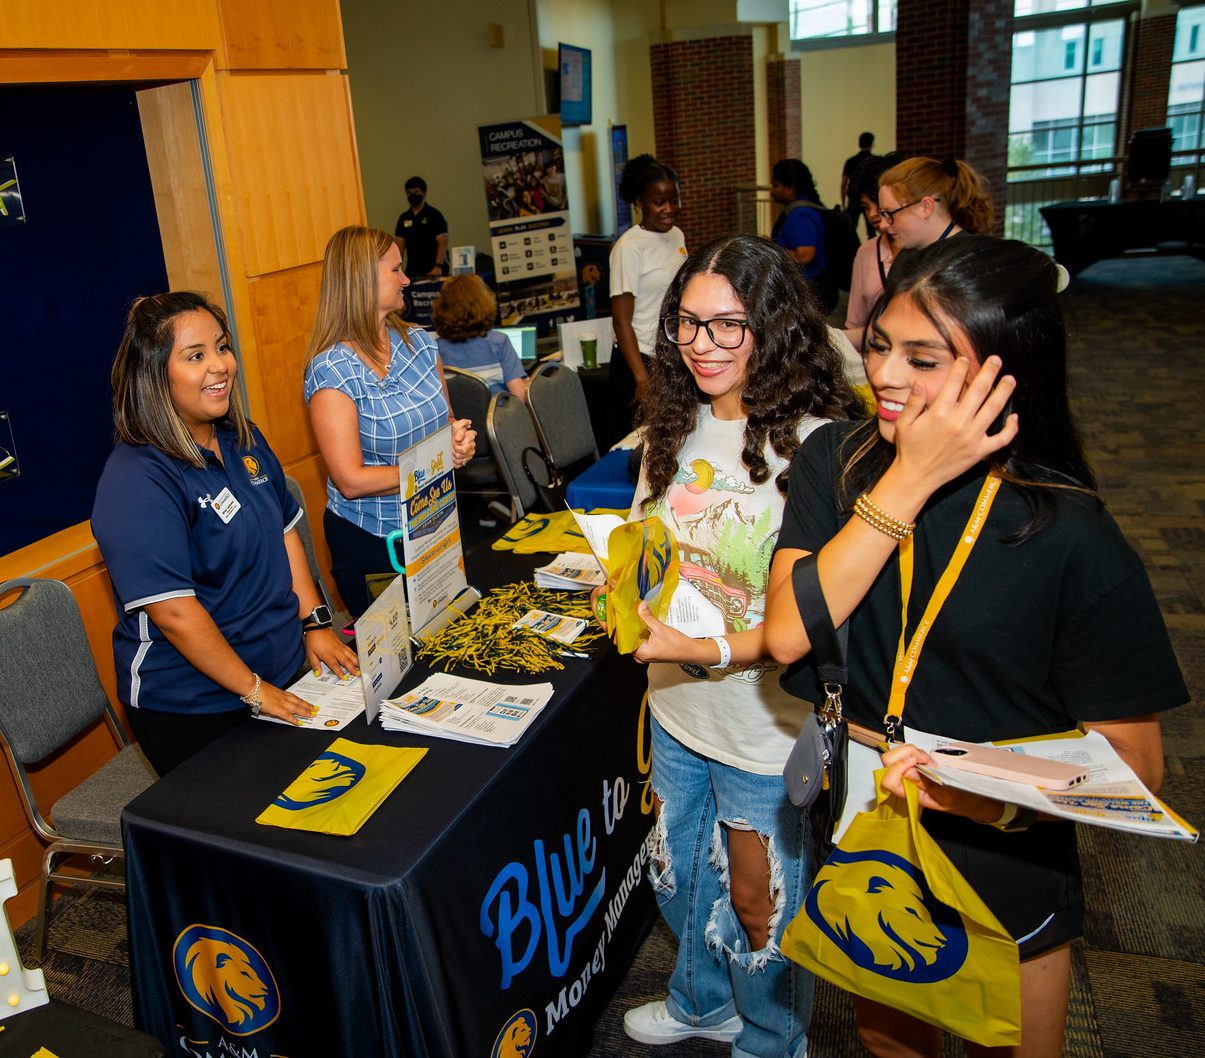 Students smile for the camera in front of a table holding brochures. The table has a black cloth with "Blue to Gold Money Management Center" written on the front.